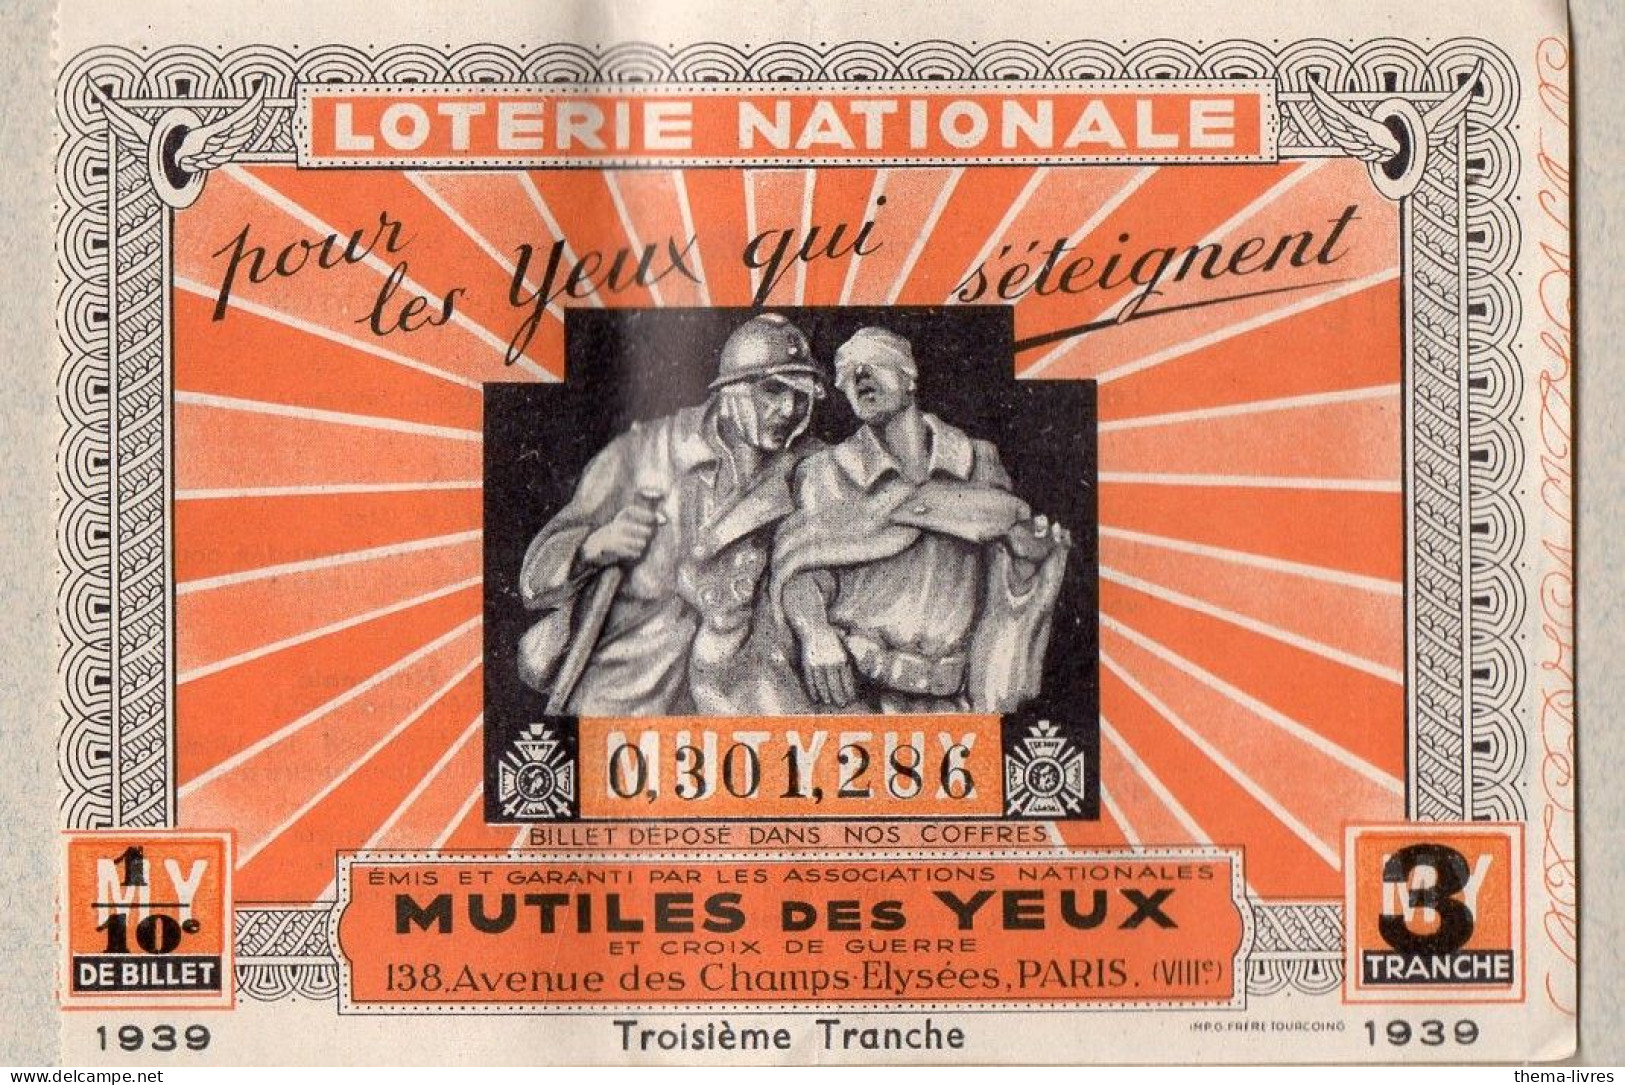 Billet LOTERIE NATIONALE 1939 MUTILES DES YEUX    (PPP46912 /B) - Lottery Tickets